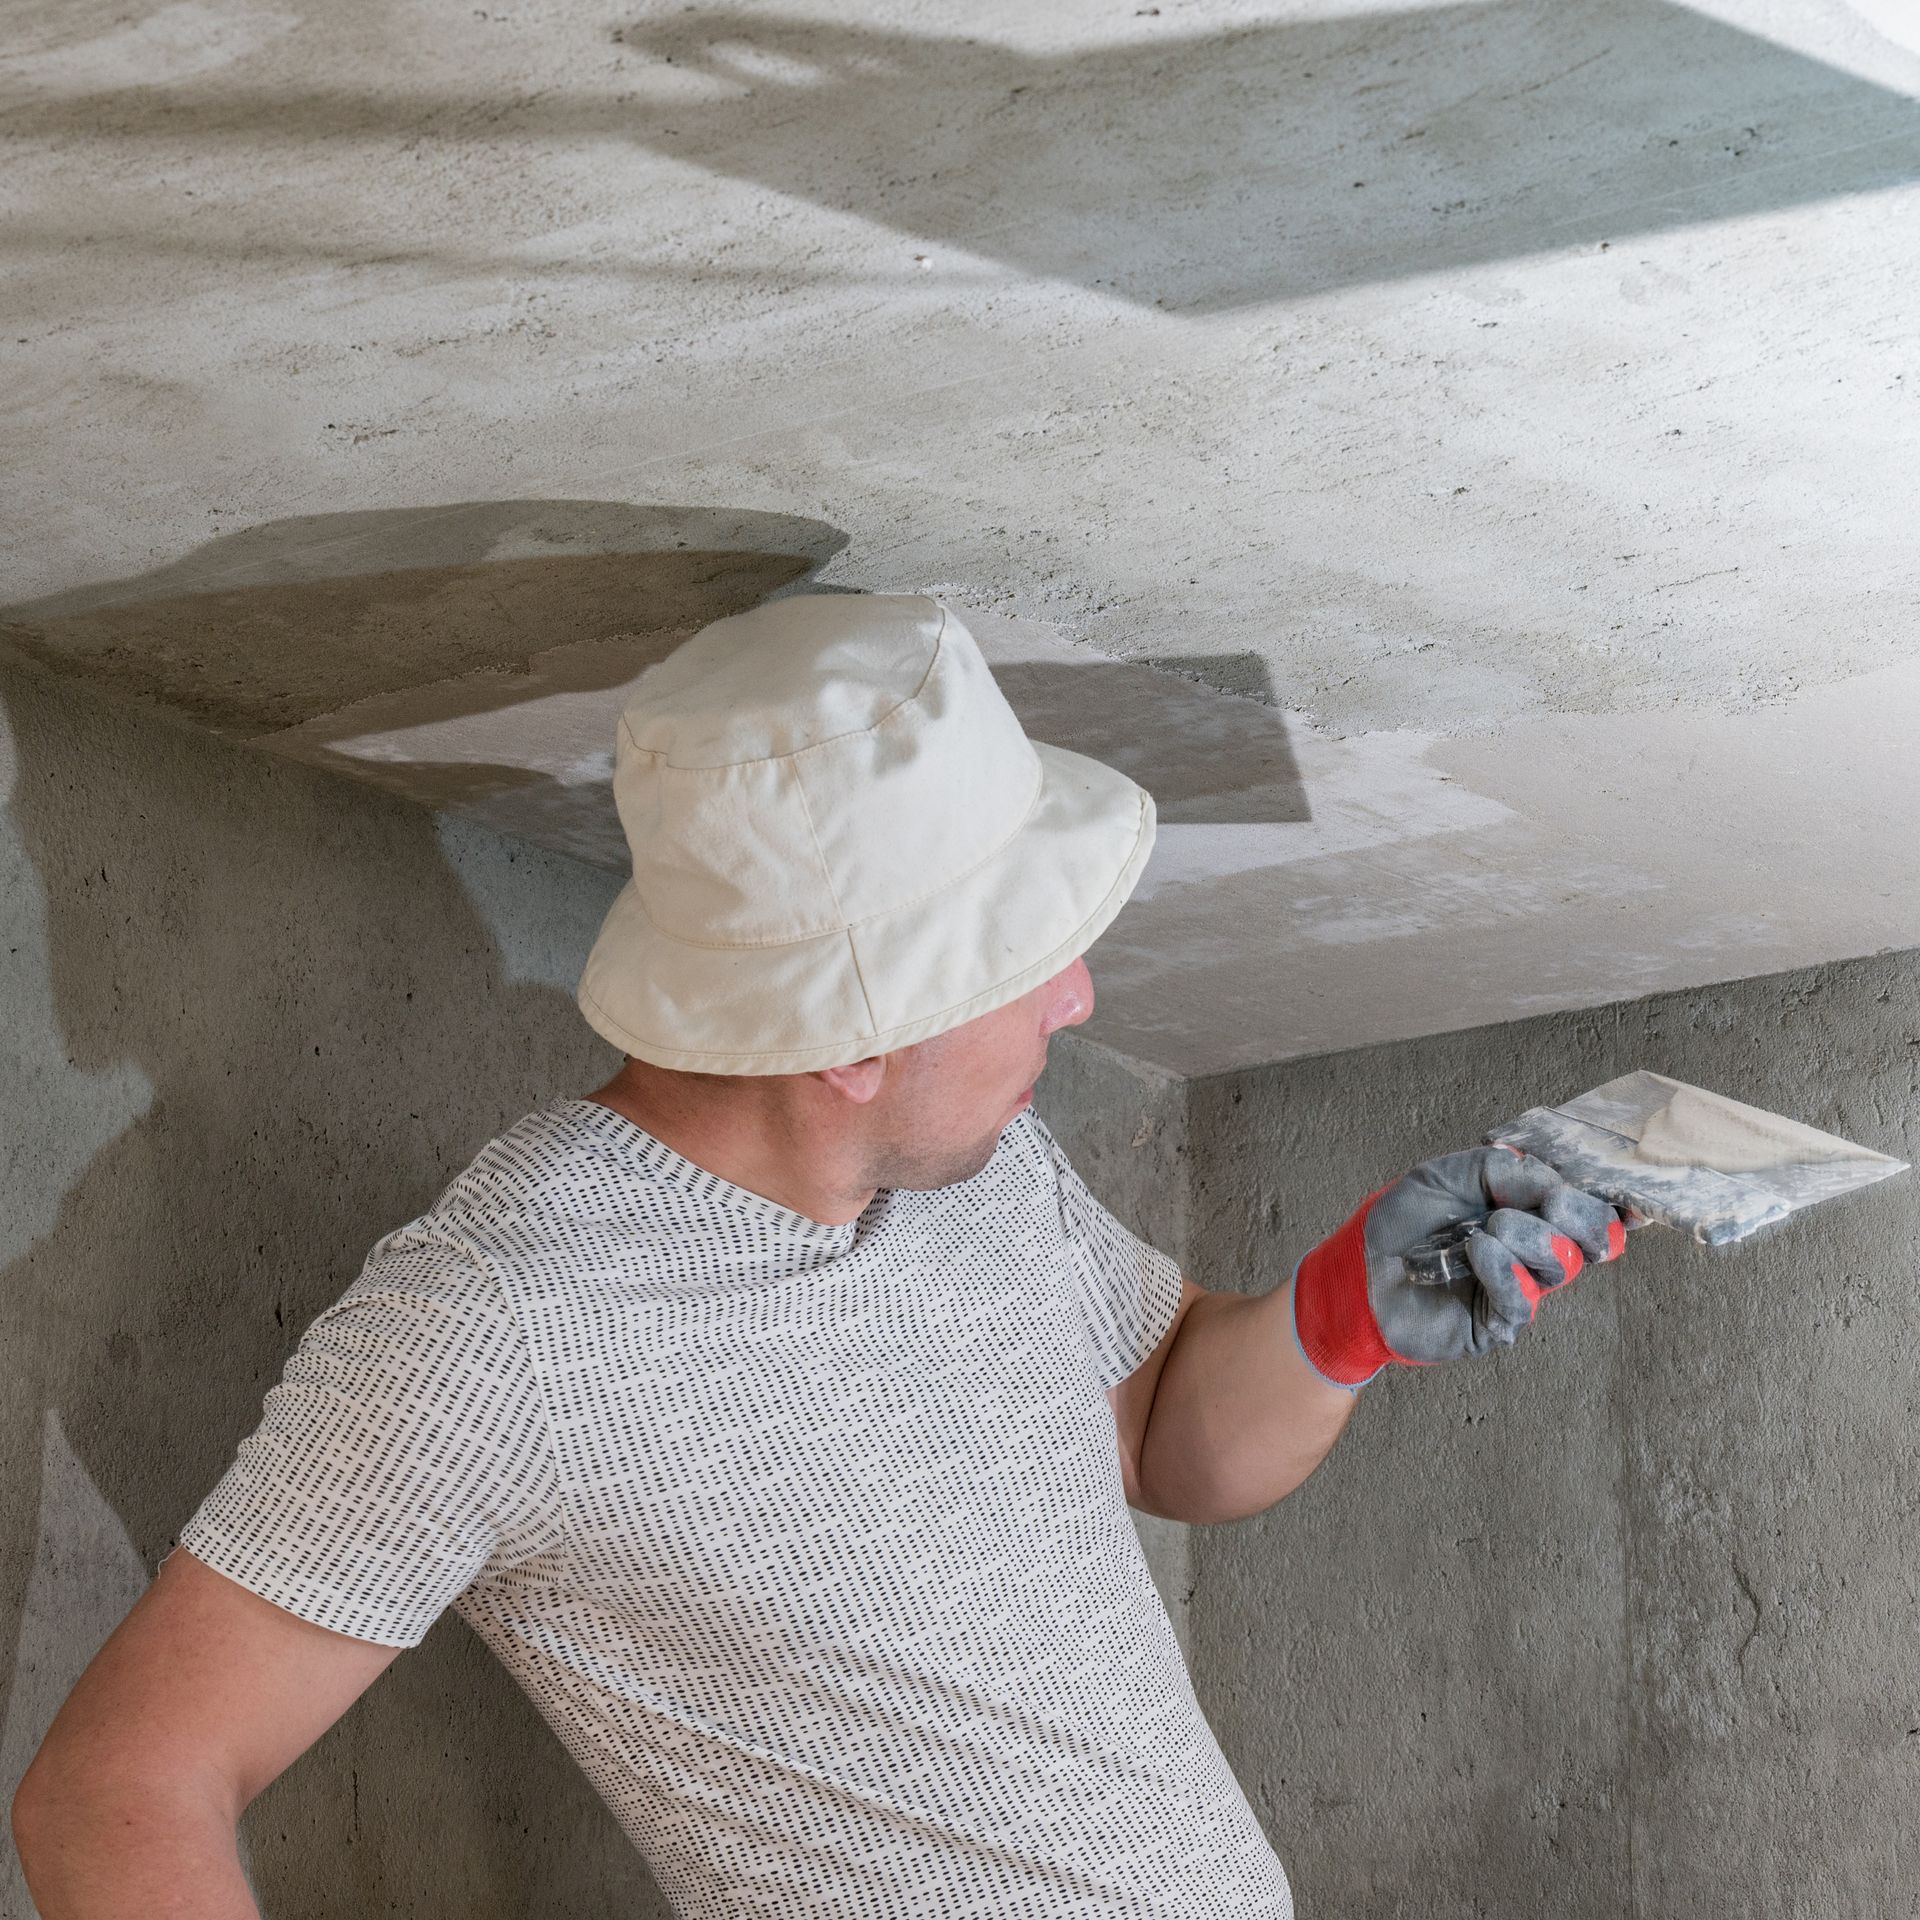 Popcorn Ceiling Removal Duration